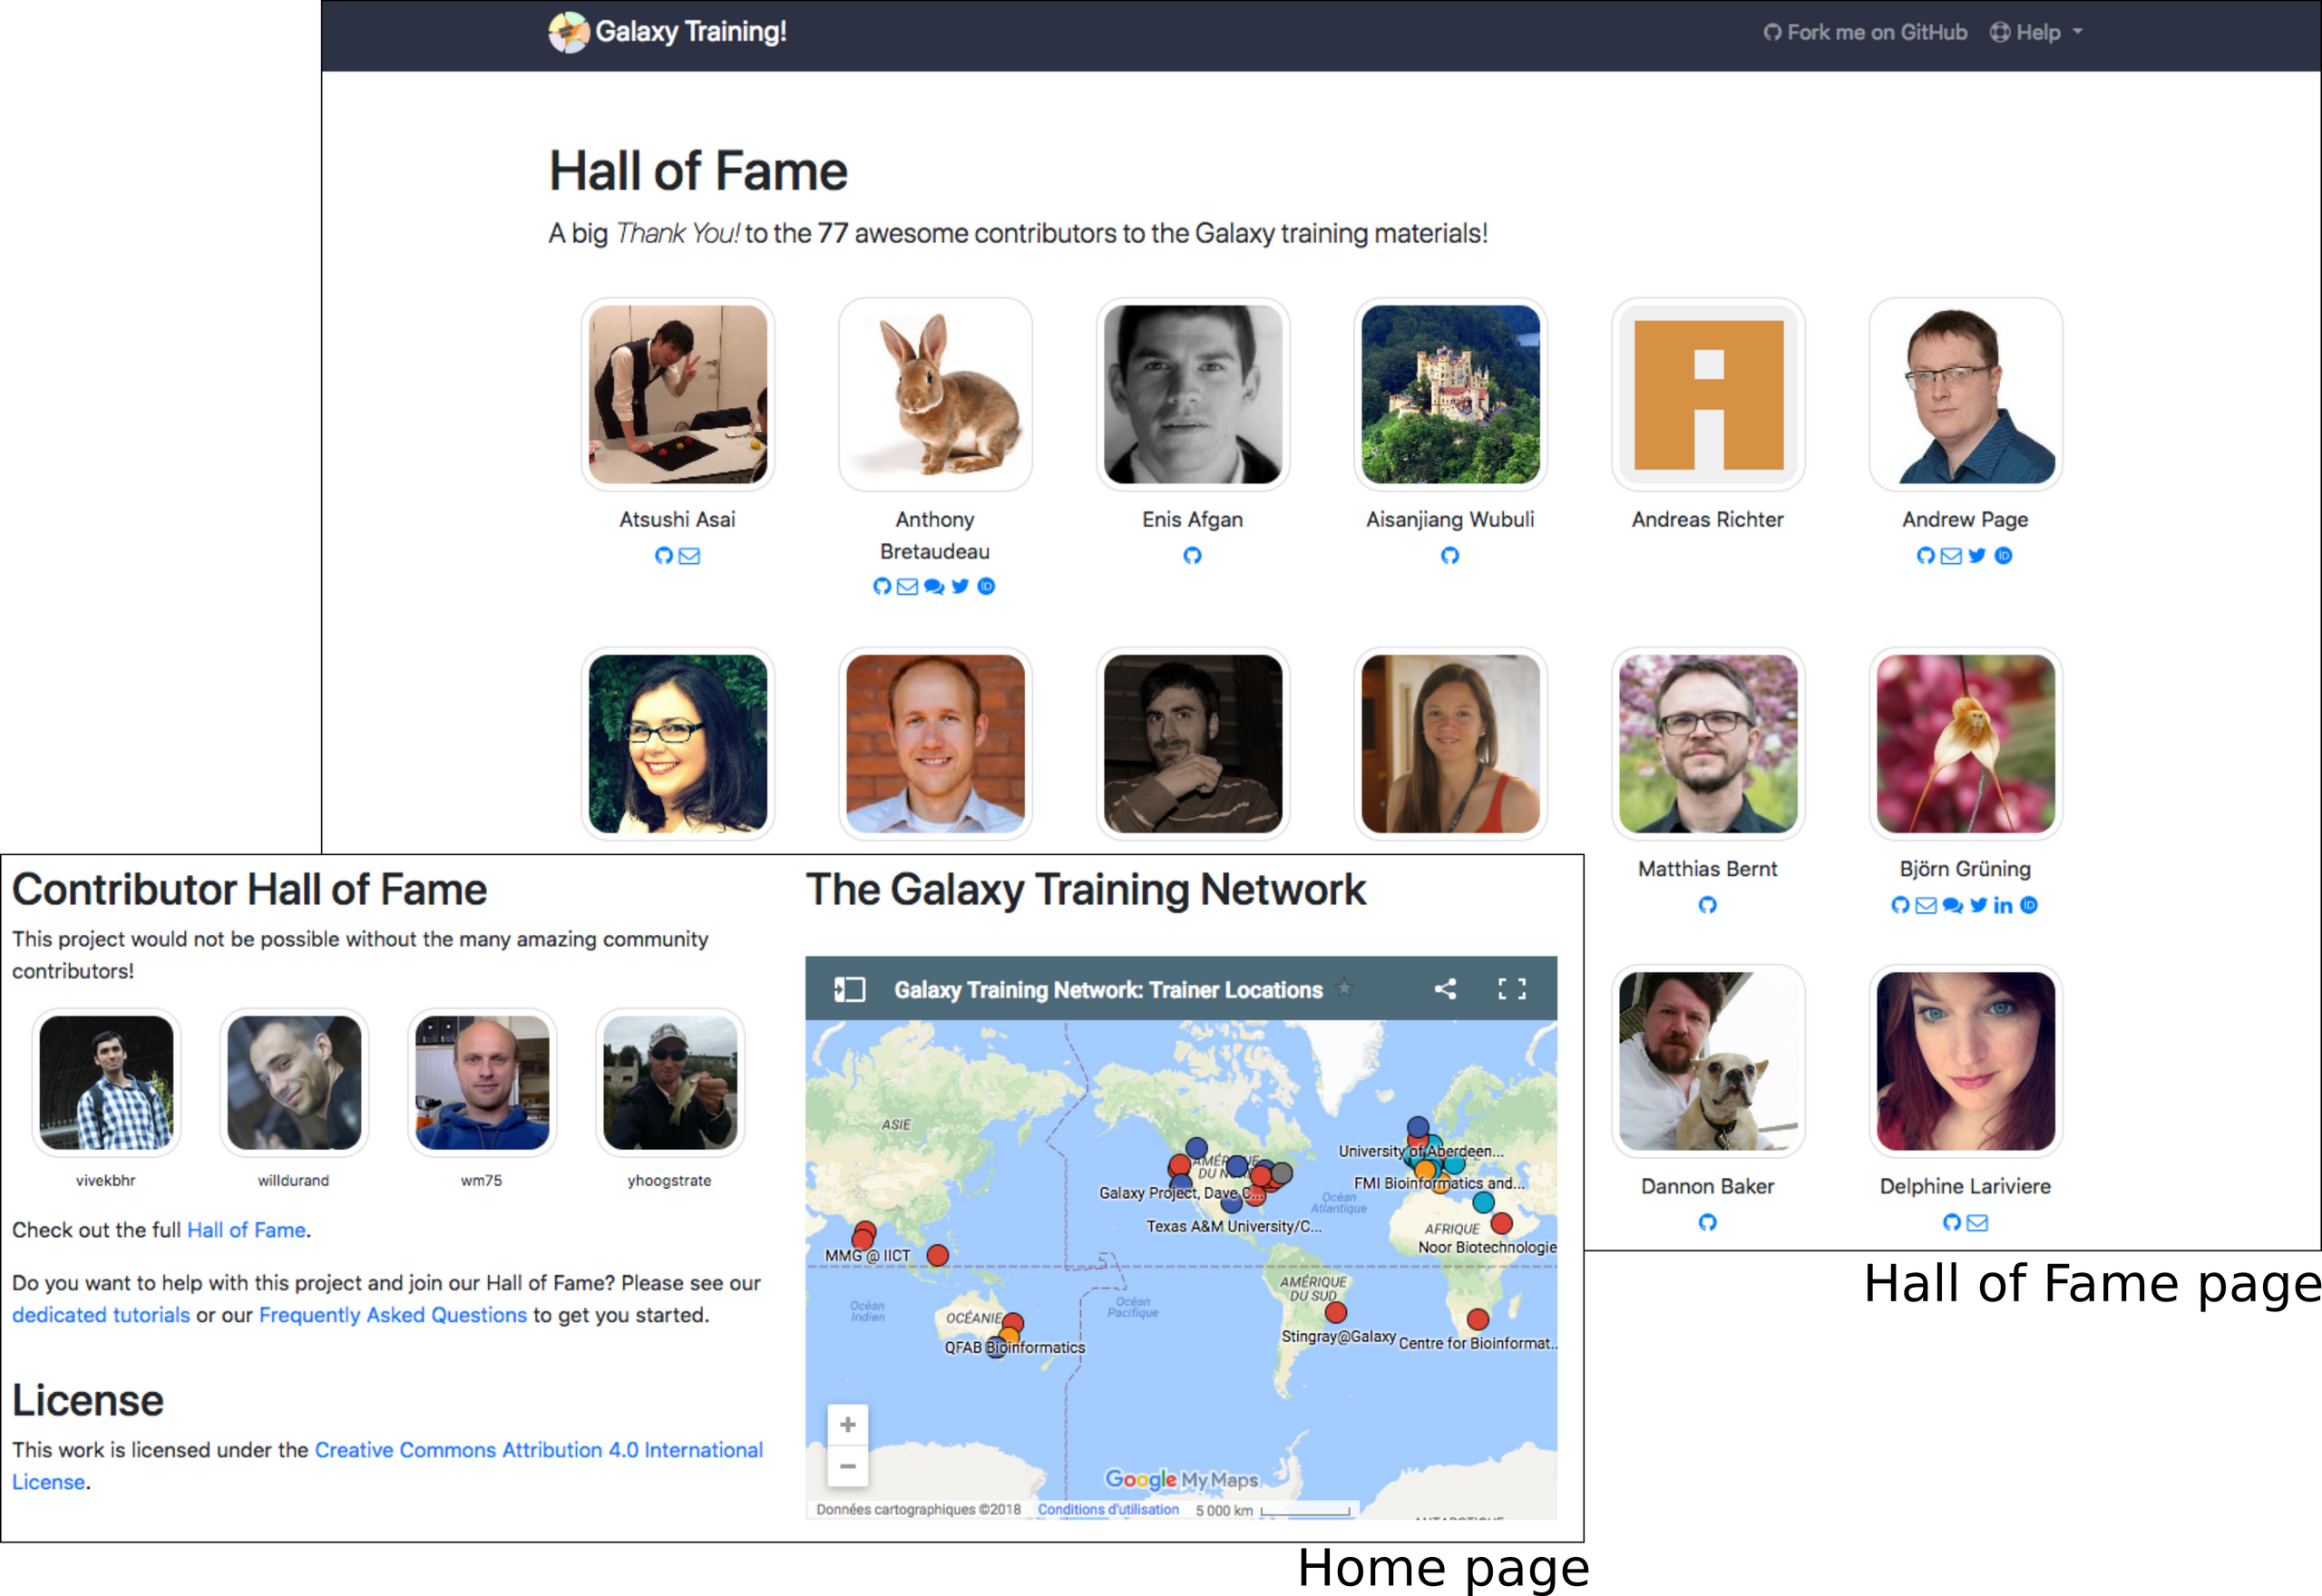 Hall of Fame page and slide show on homepage